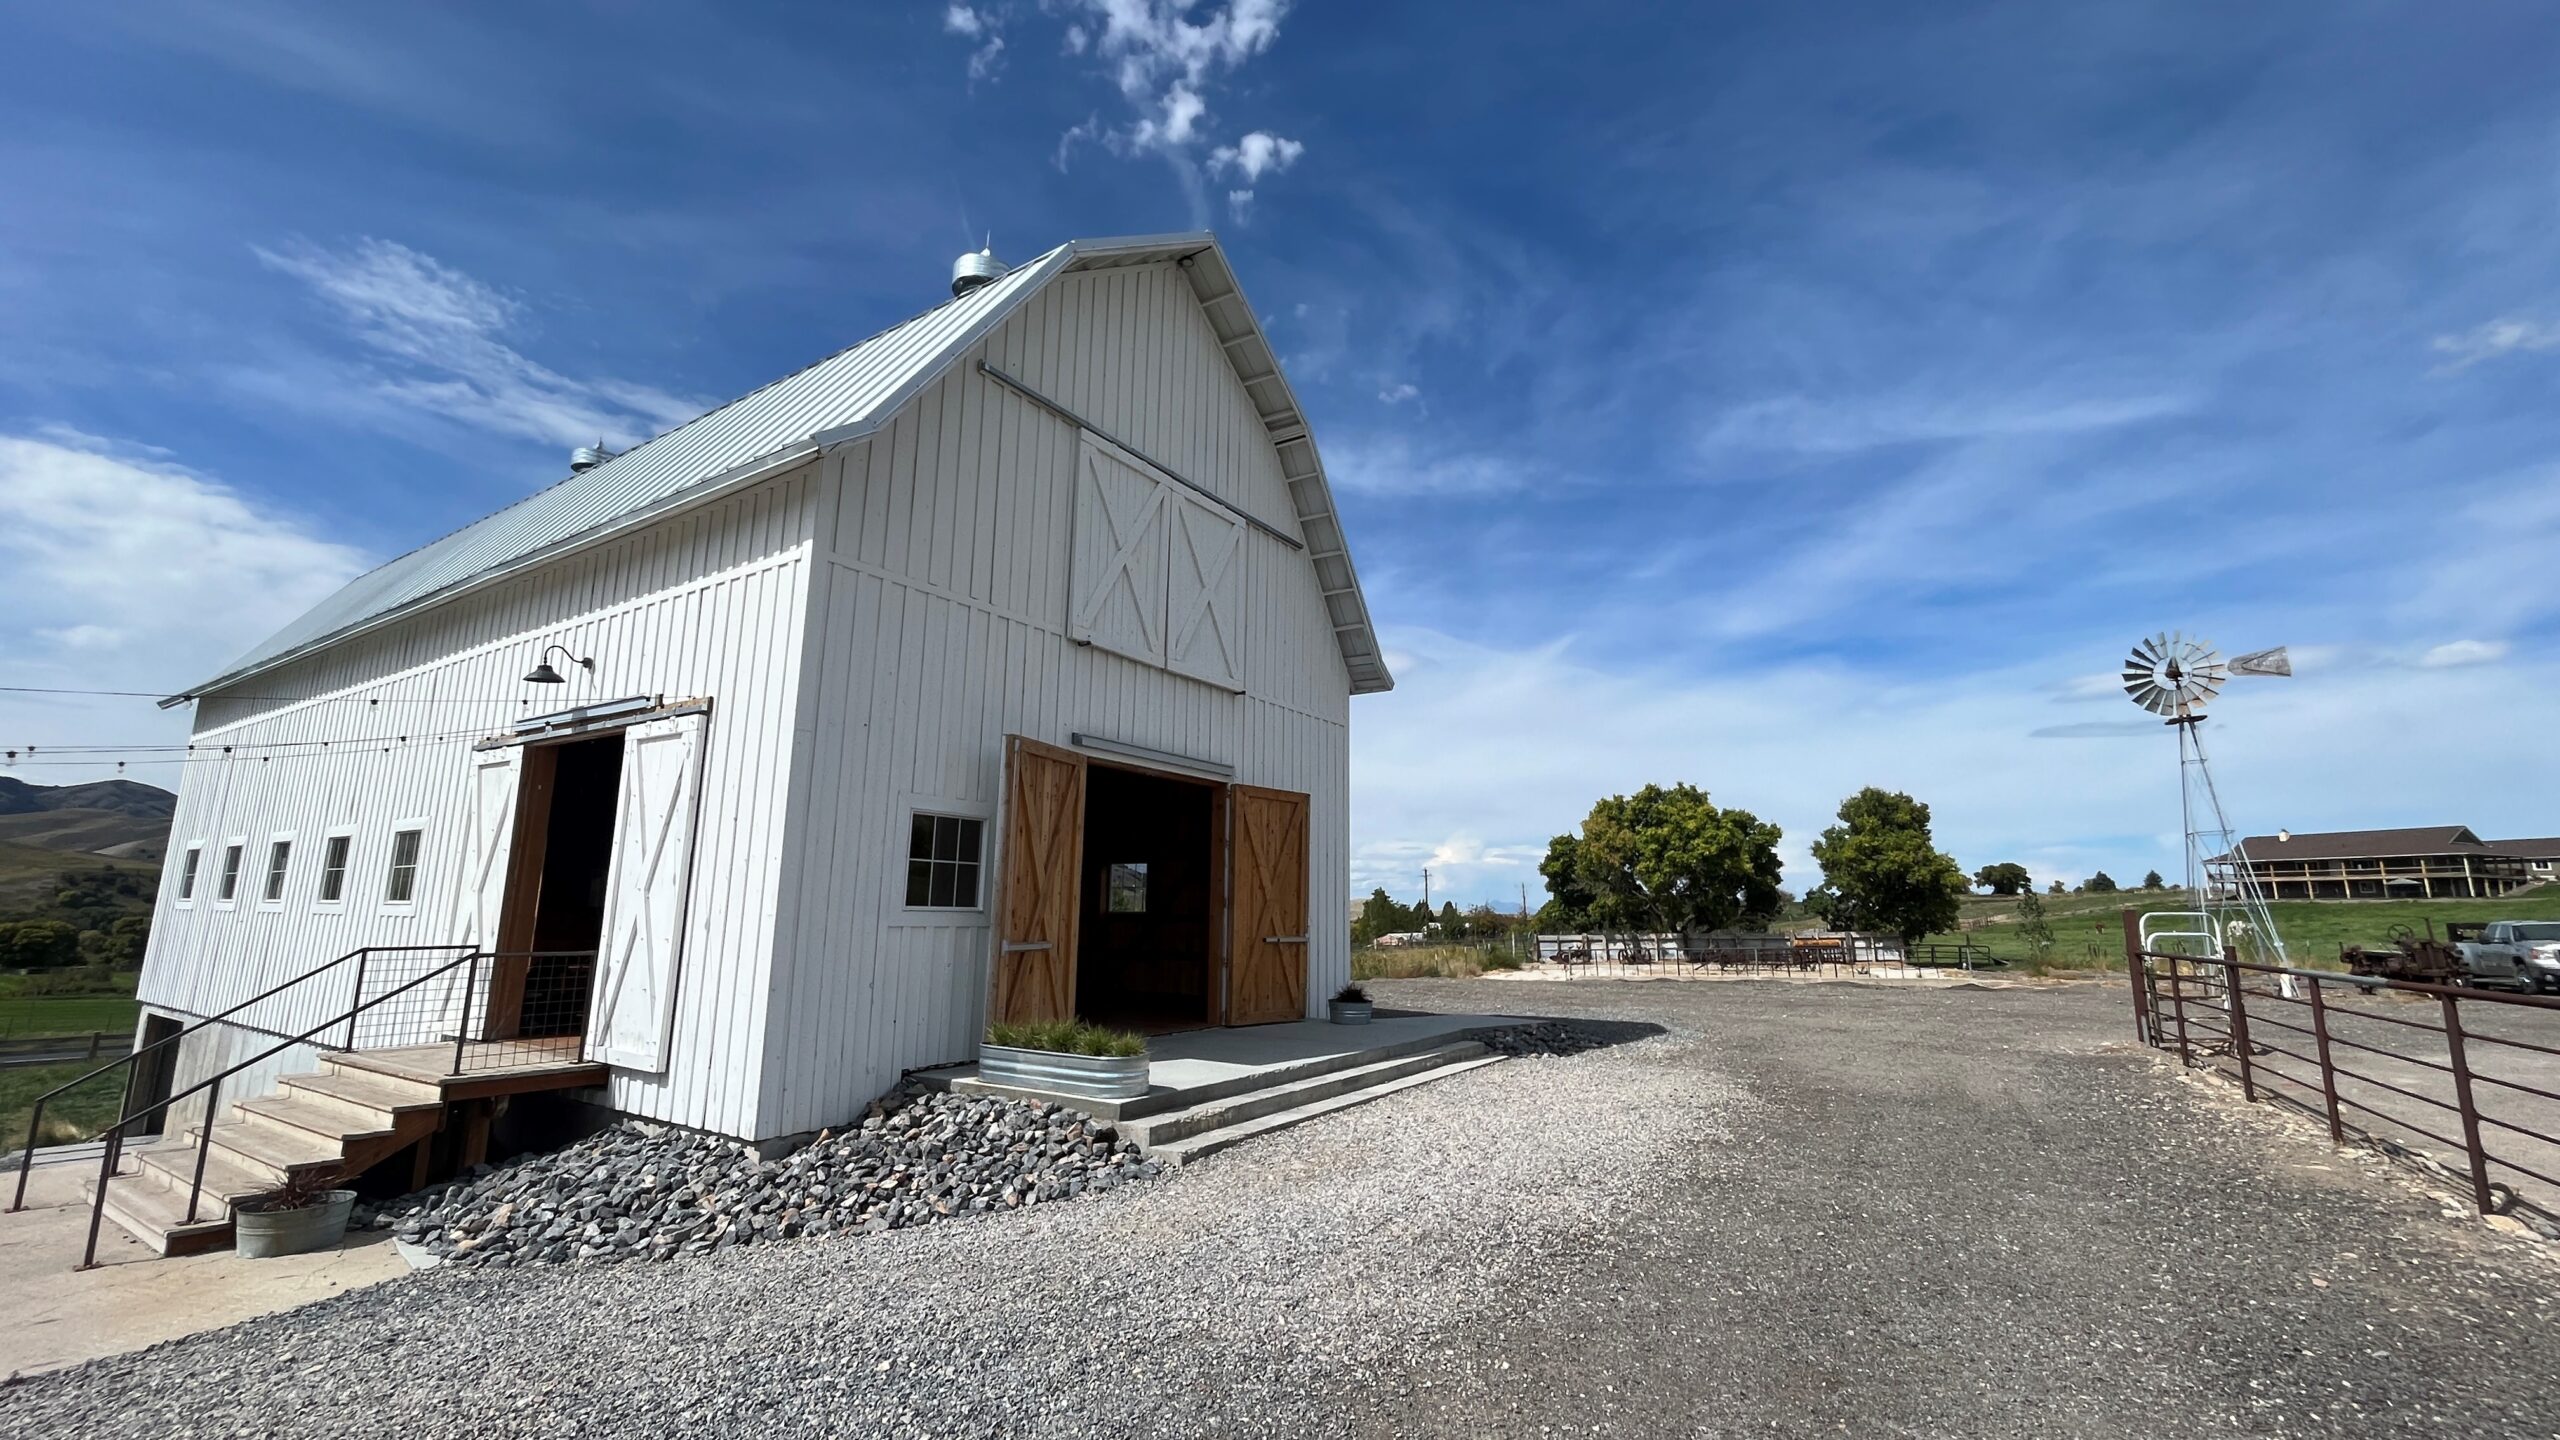 The exterior of the barn used in the weddings hosted by the Sniders. (Aubrey Shafer/KSL TV)...